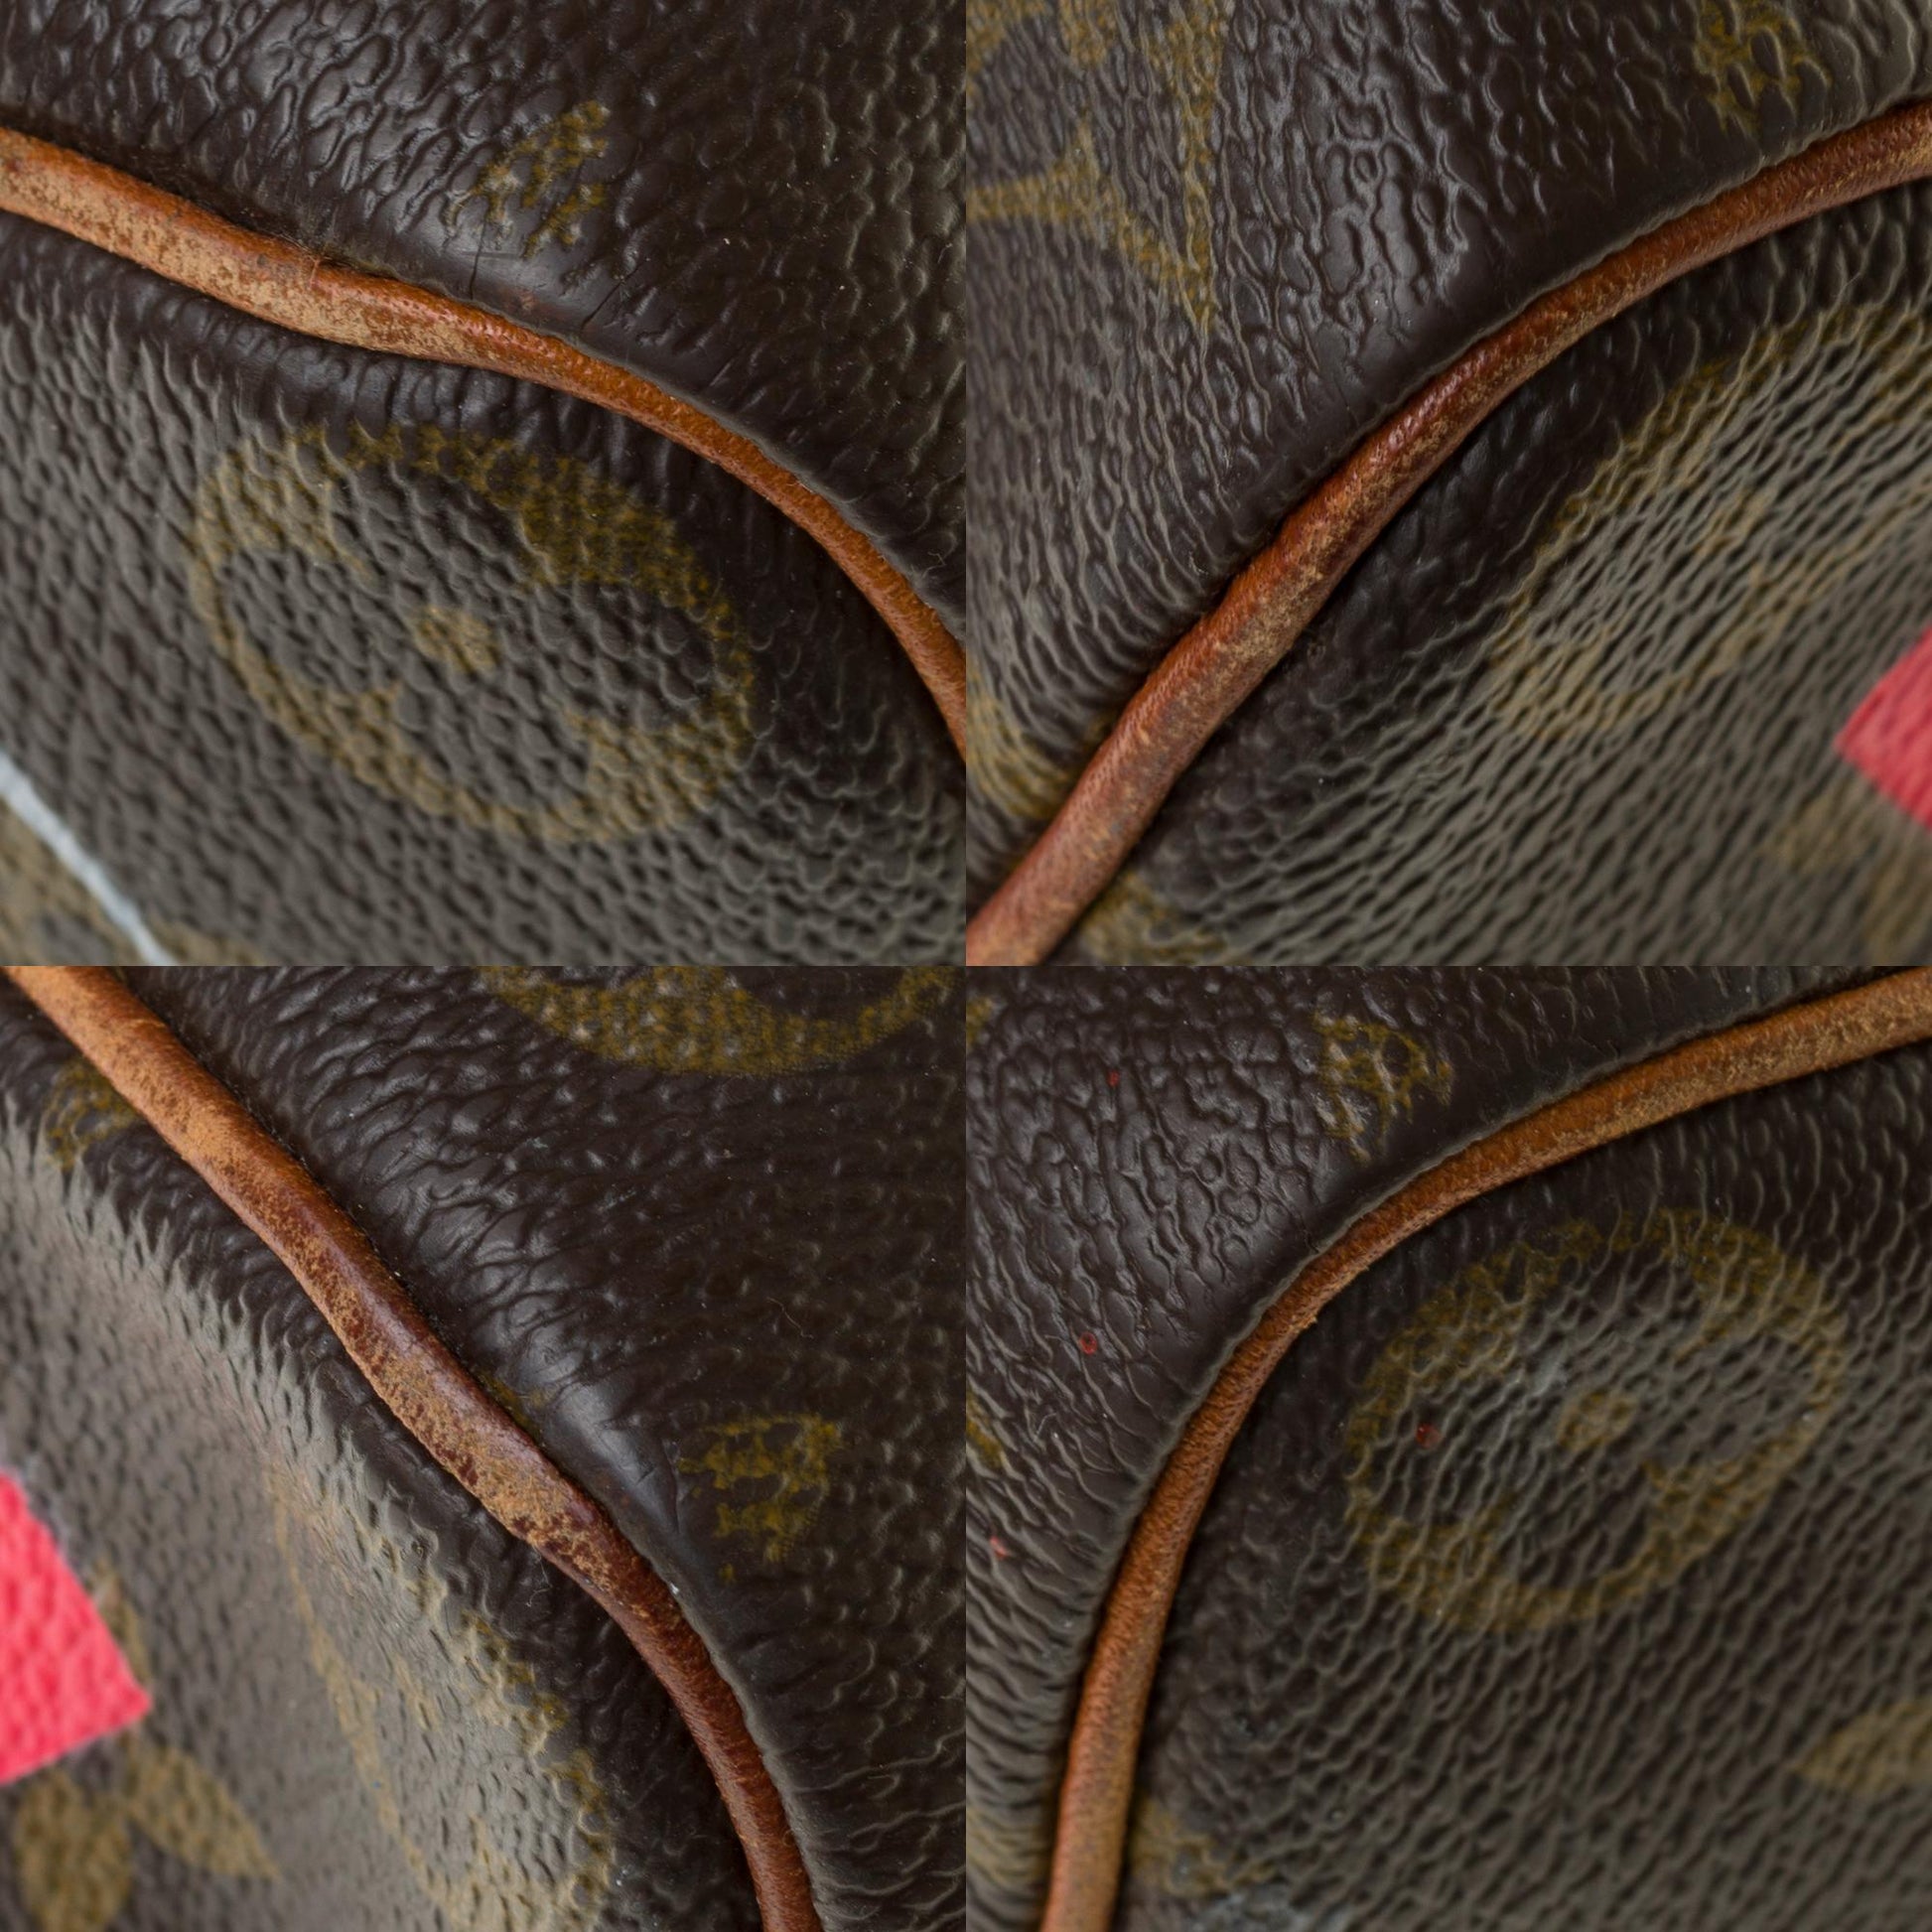 Louis Vuitton Speedy 35 handbag in Monogram canvas customized Lovely  Audrey  For Sale at 1stDibs